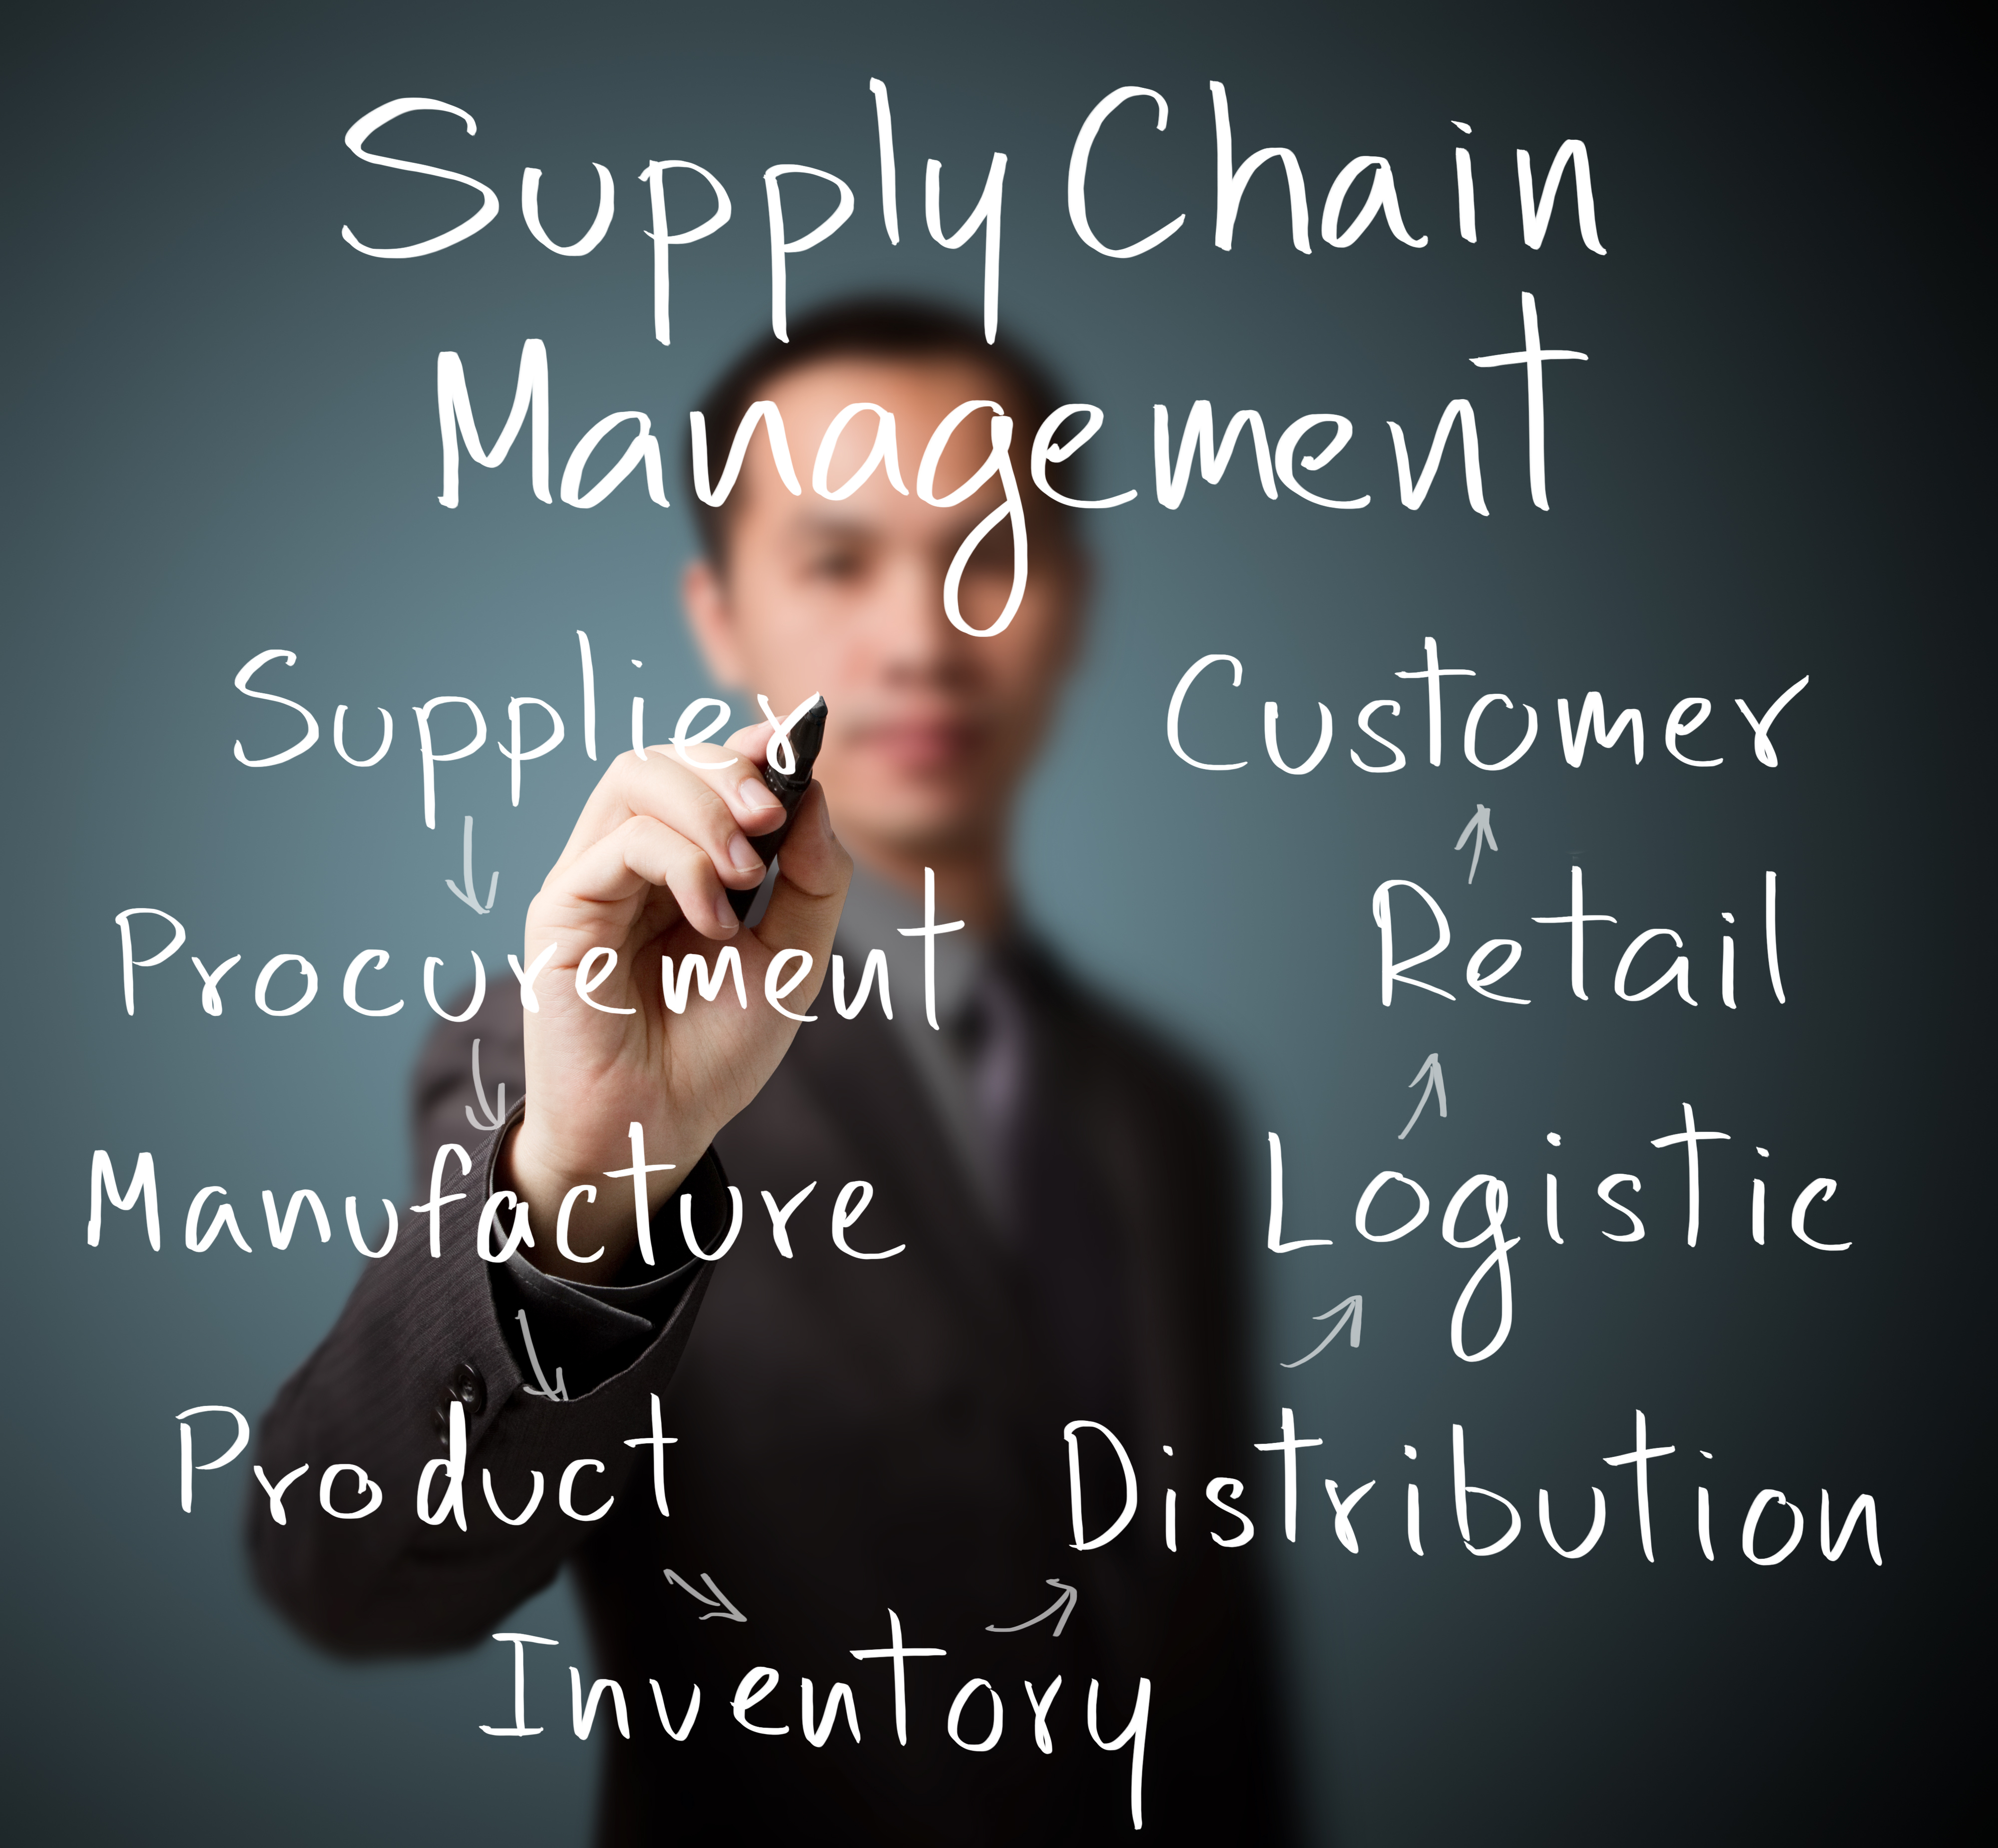 A picture showing the aspects of supply chain management as a job after mba